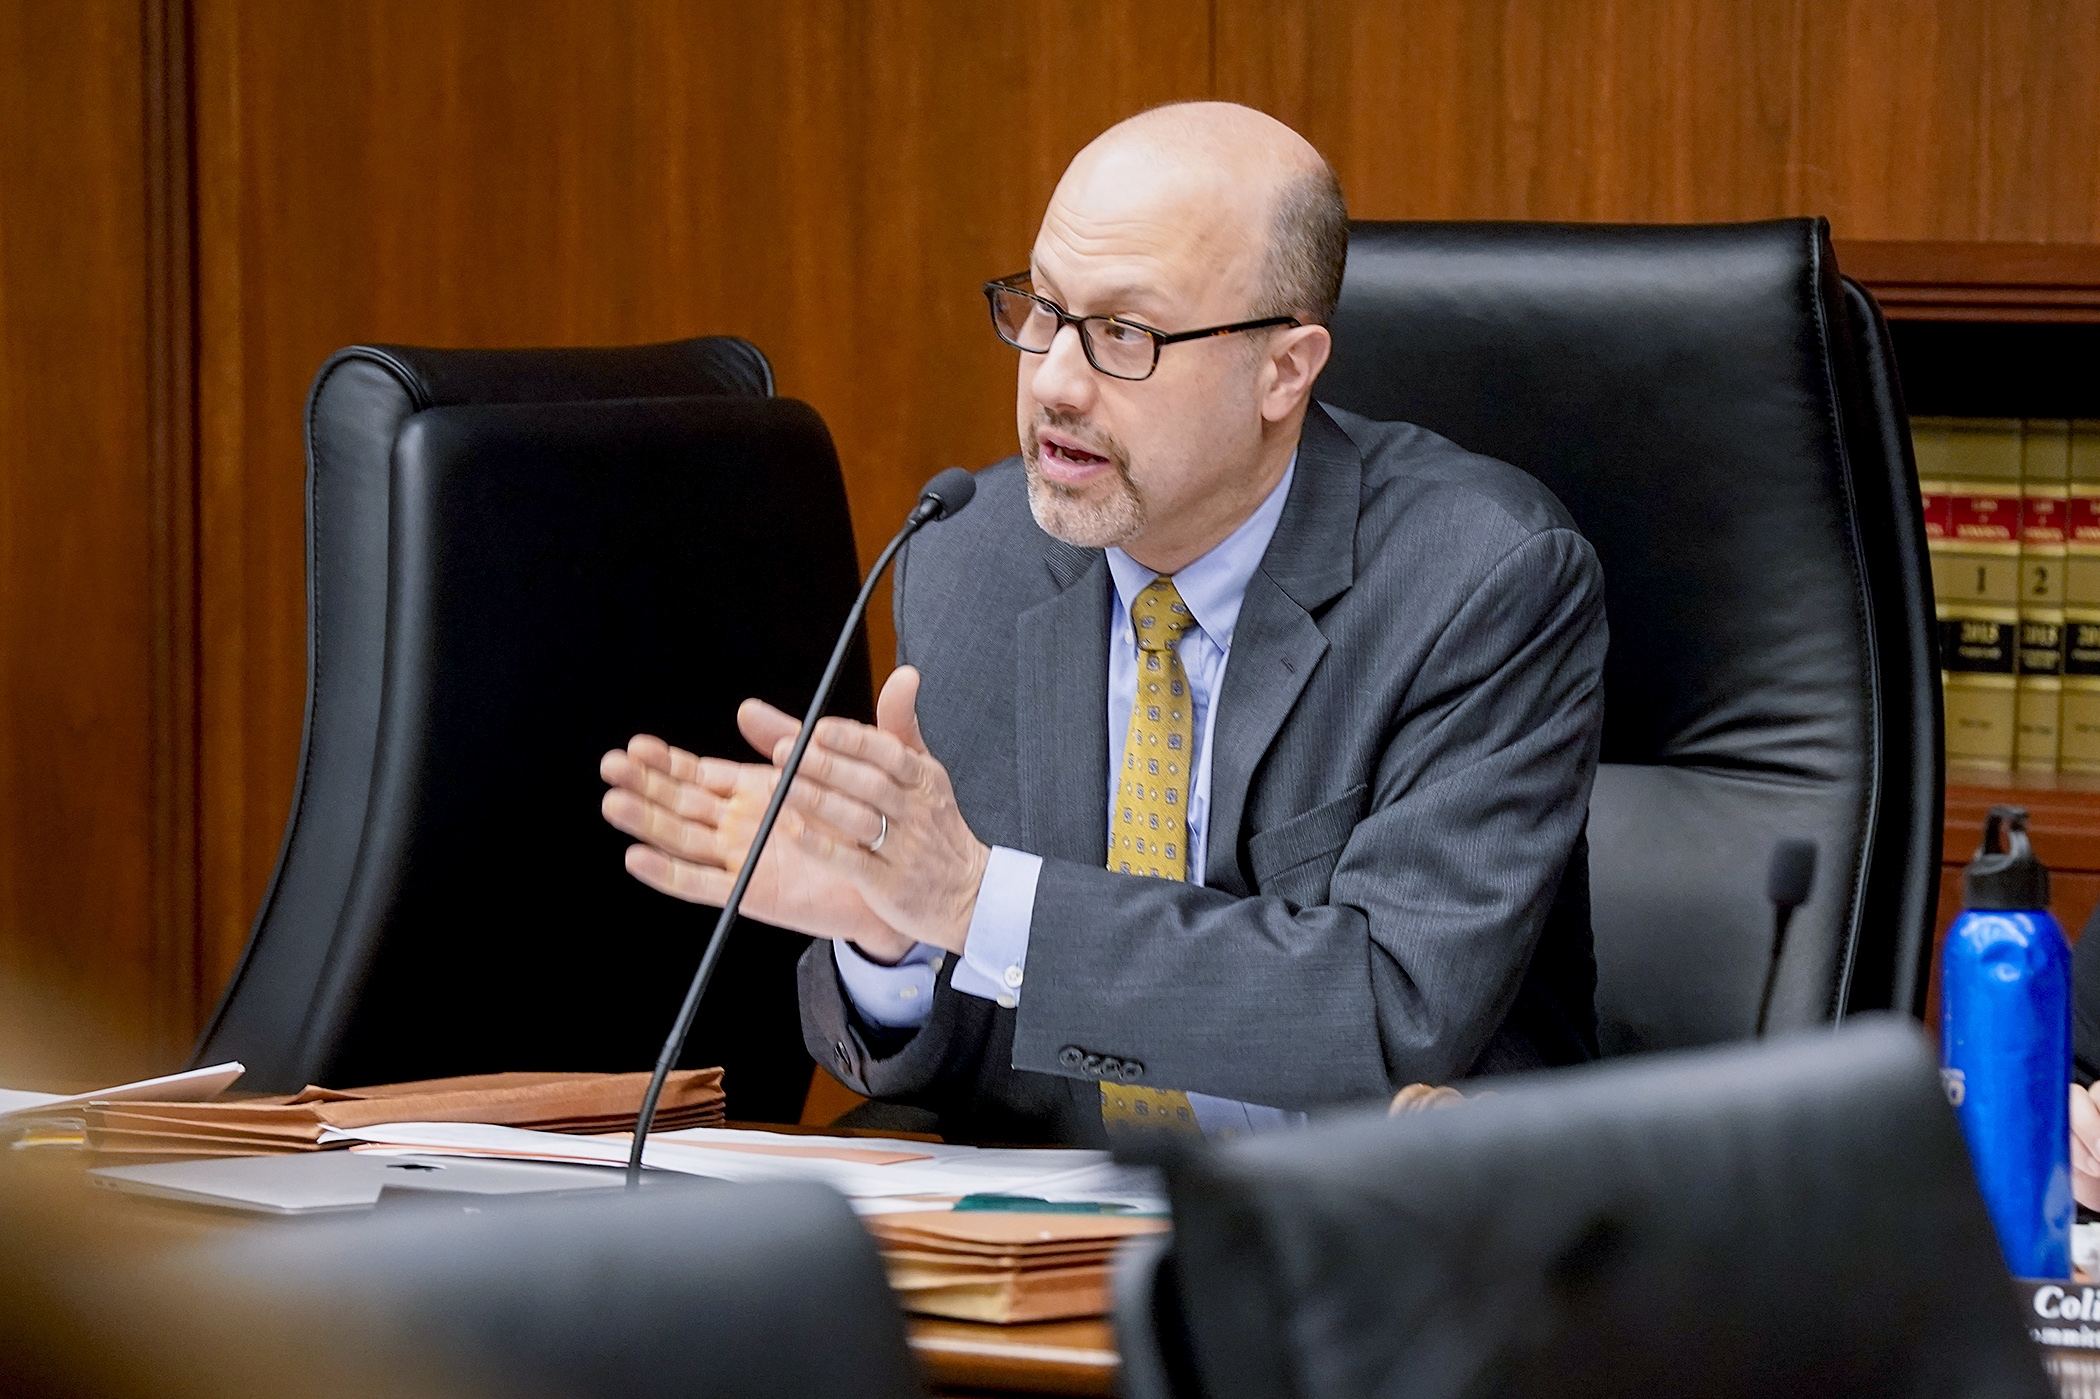 Rep. Dave Pinto (DFL-St. Paul), the committee chair and sponsor of HF2476, during the April 16 meeting of the House Children and Families Finance and Policy Committee. (House Photography file photo)